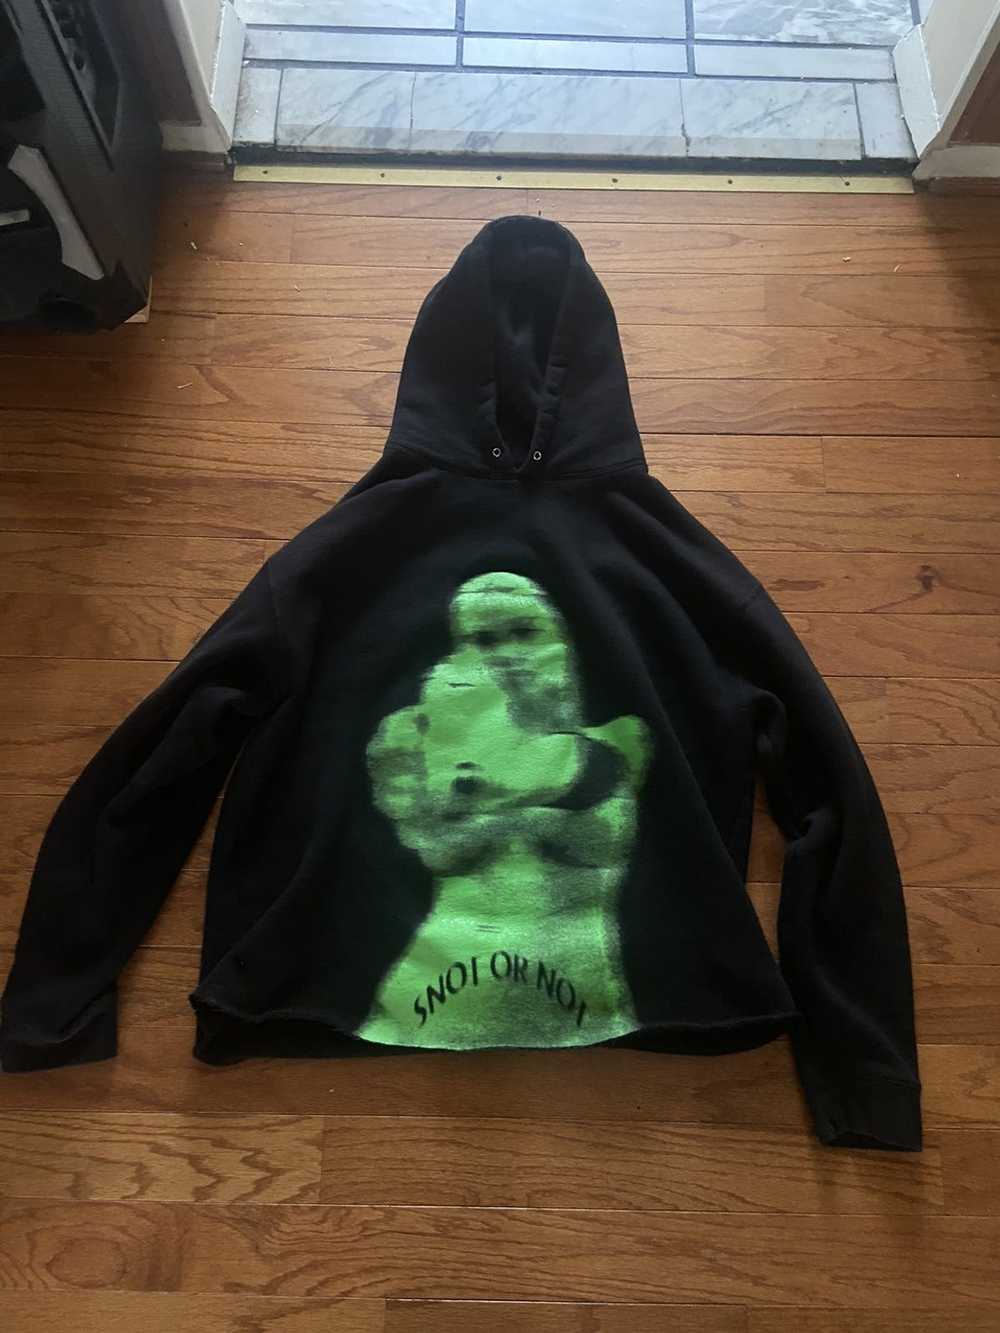 Streetwear Snot Or Not Tour Hoodie - image 1